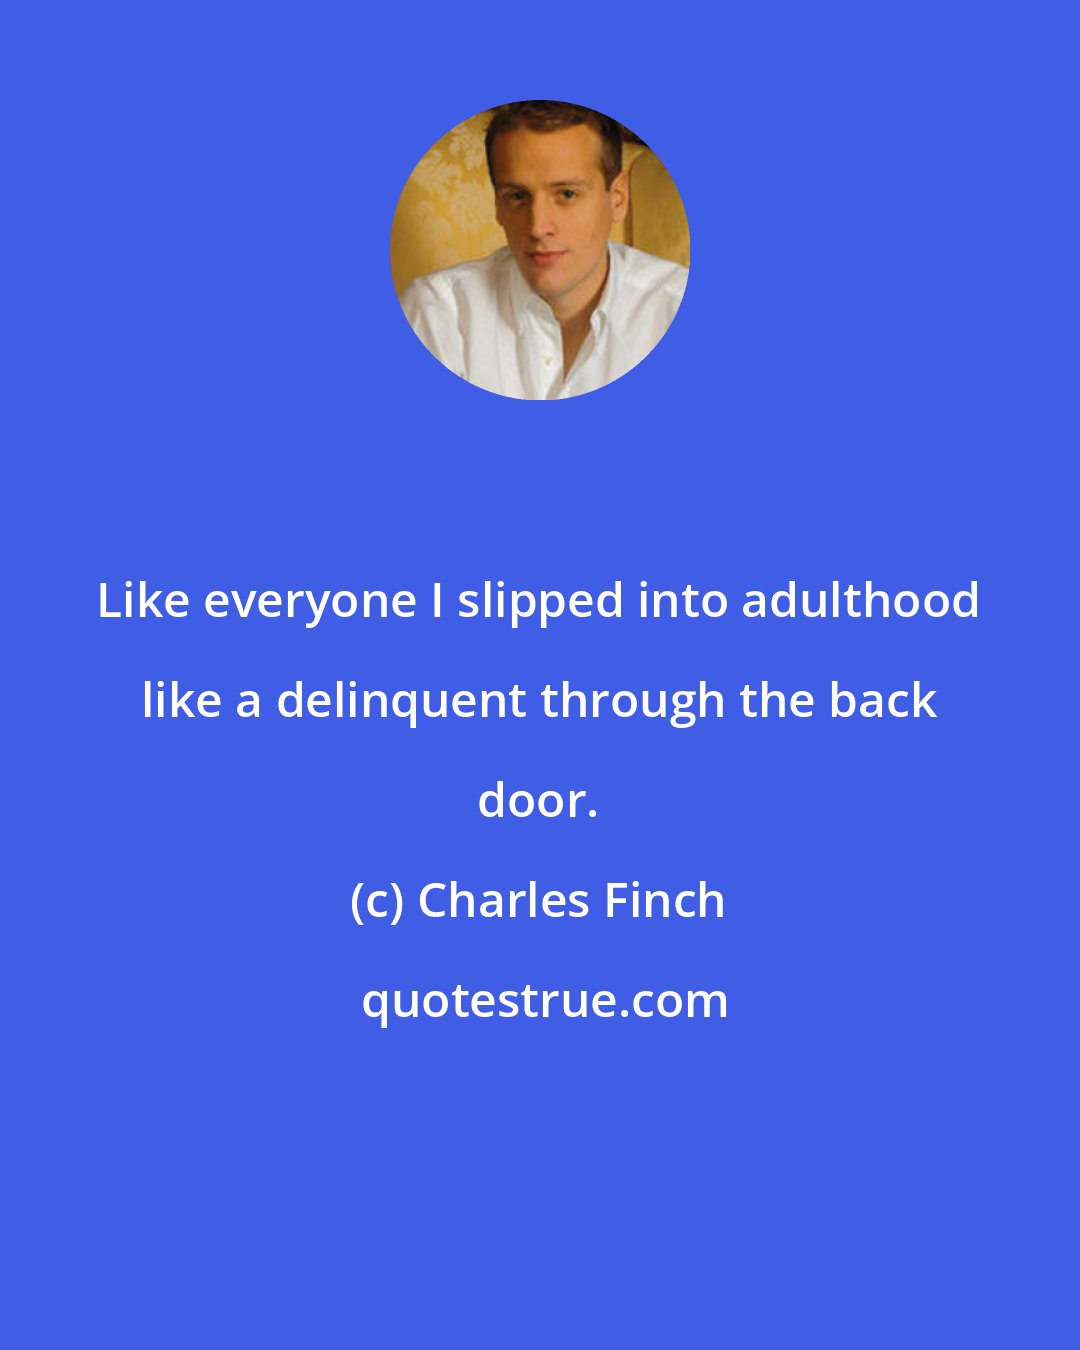 Charles Finch: Like everyone I slipped into adulthood like a delinquent through the back door.